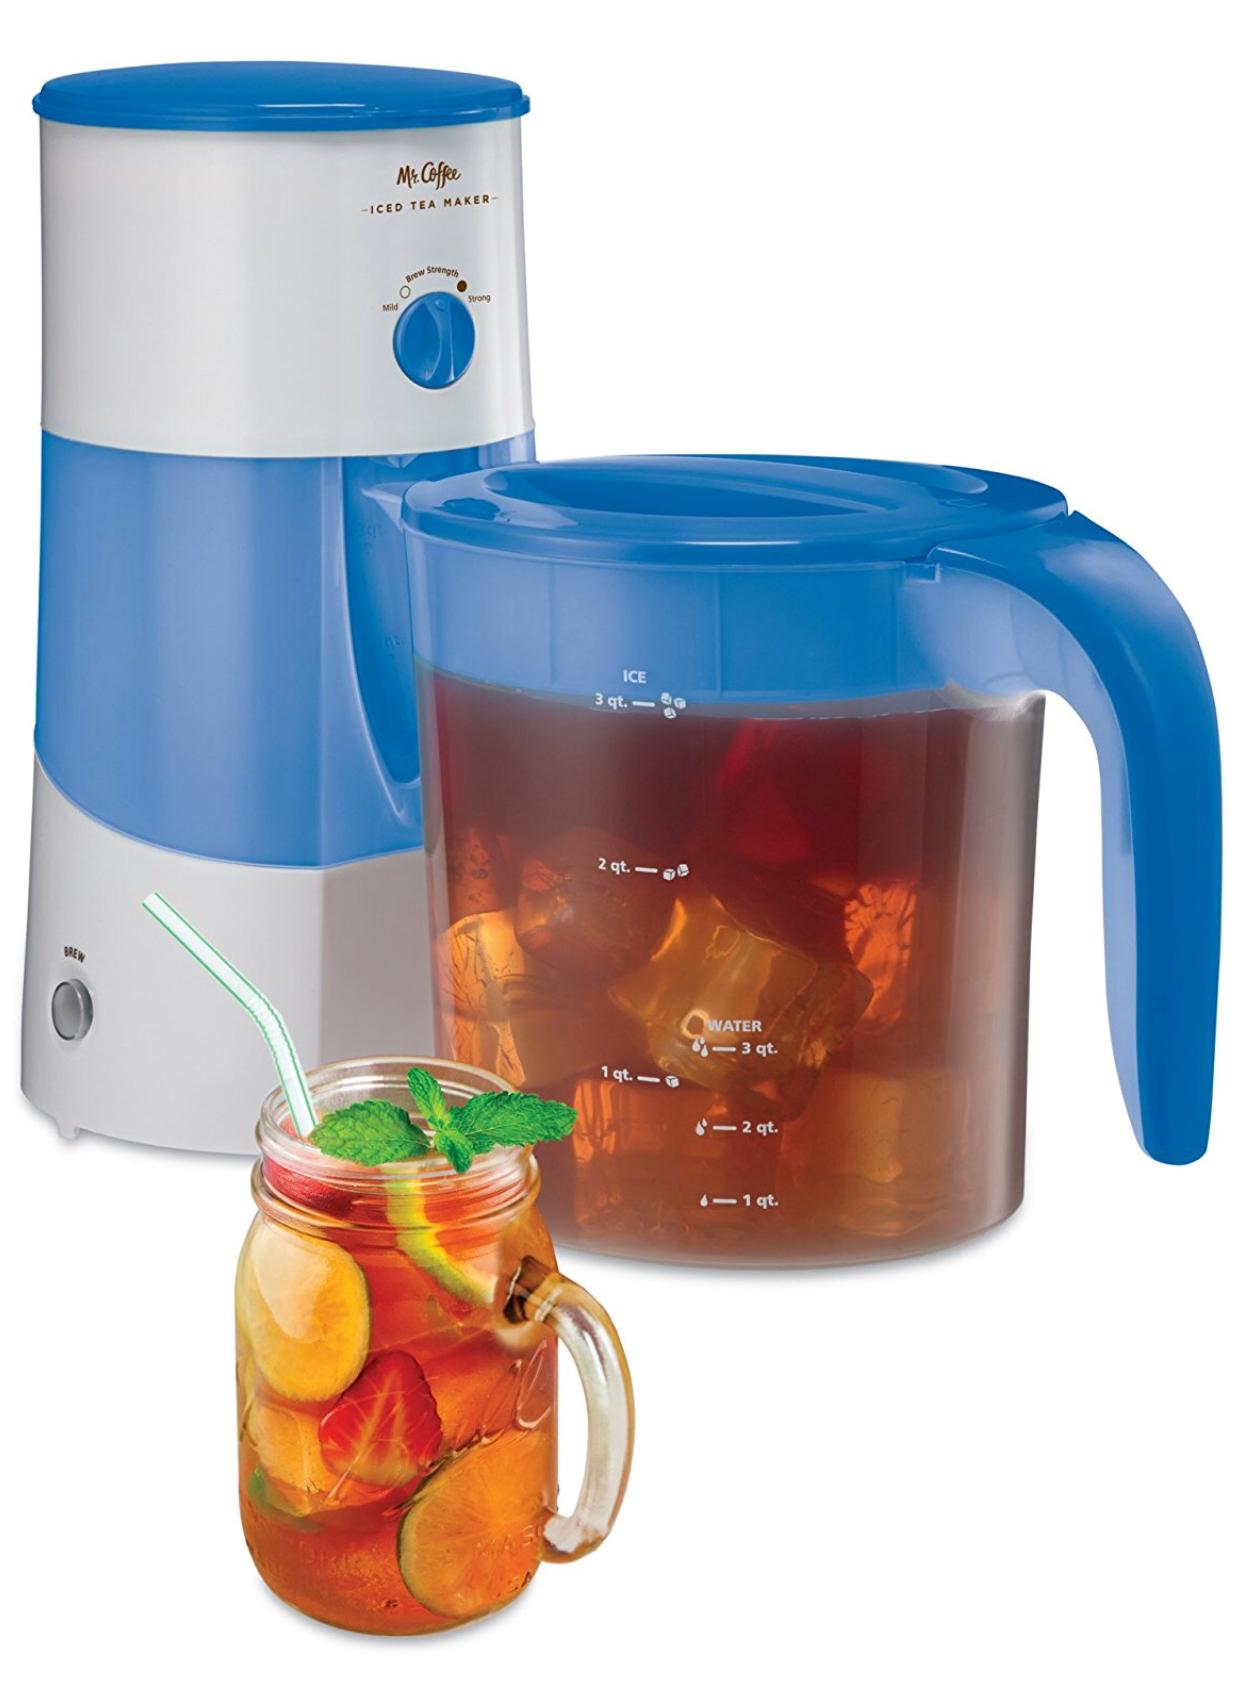 Mr. Coffee The 3 Quart Iced Tea Maker -No Pitcher- Tested & Working